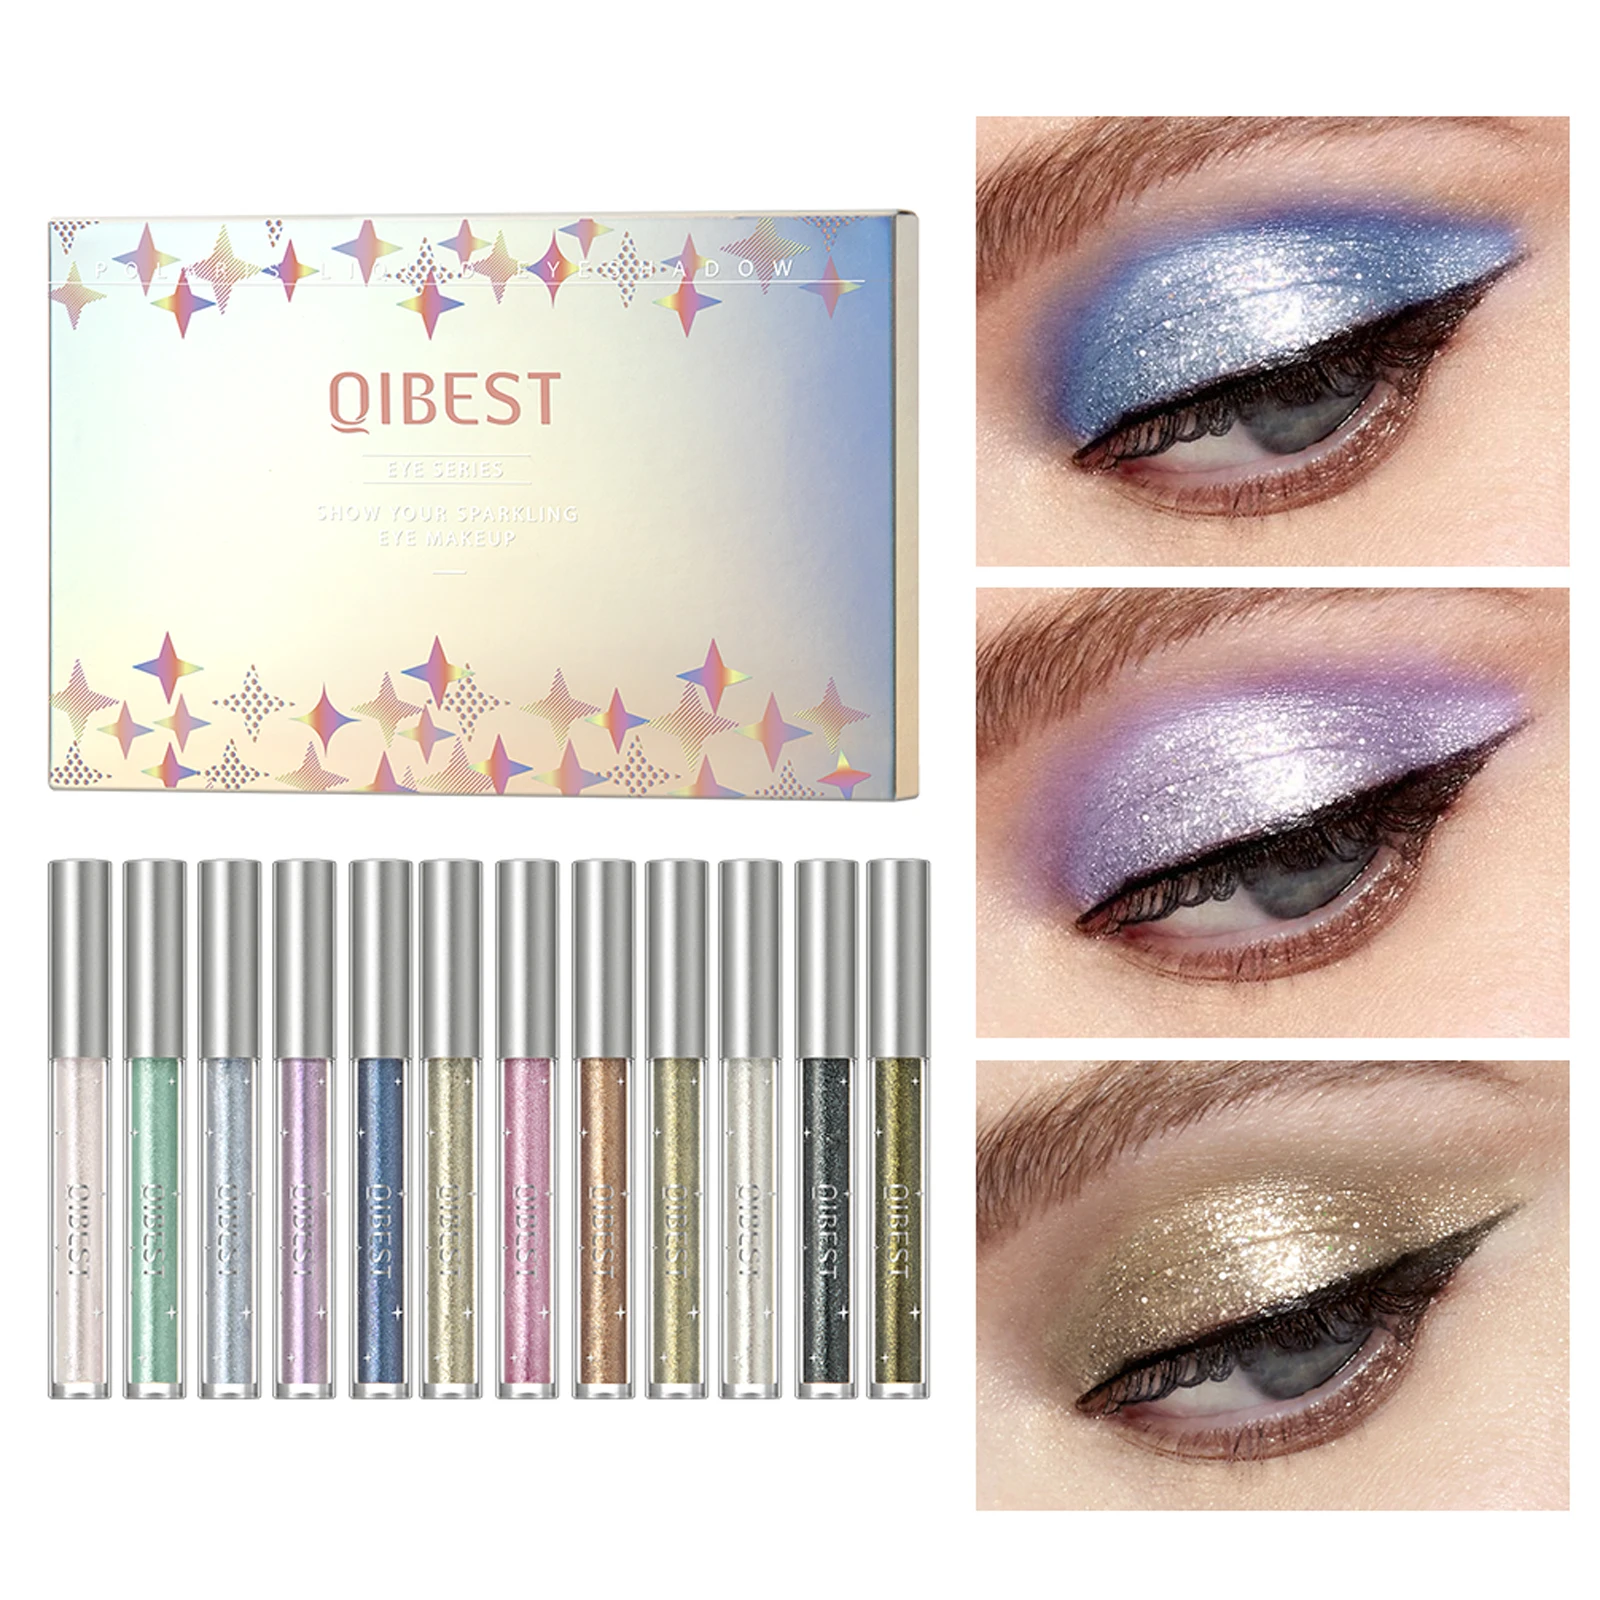 QIBEST Glitter Shimmer Eyeshadow Pen Set Cosmetic Shadow Pencil Eyeliner Quick-drying Liquid Sticker Outline Eyemakeup